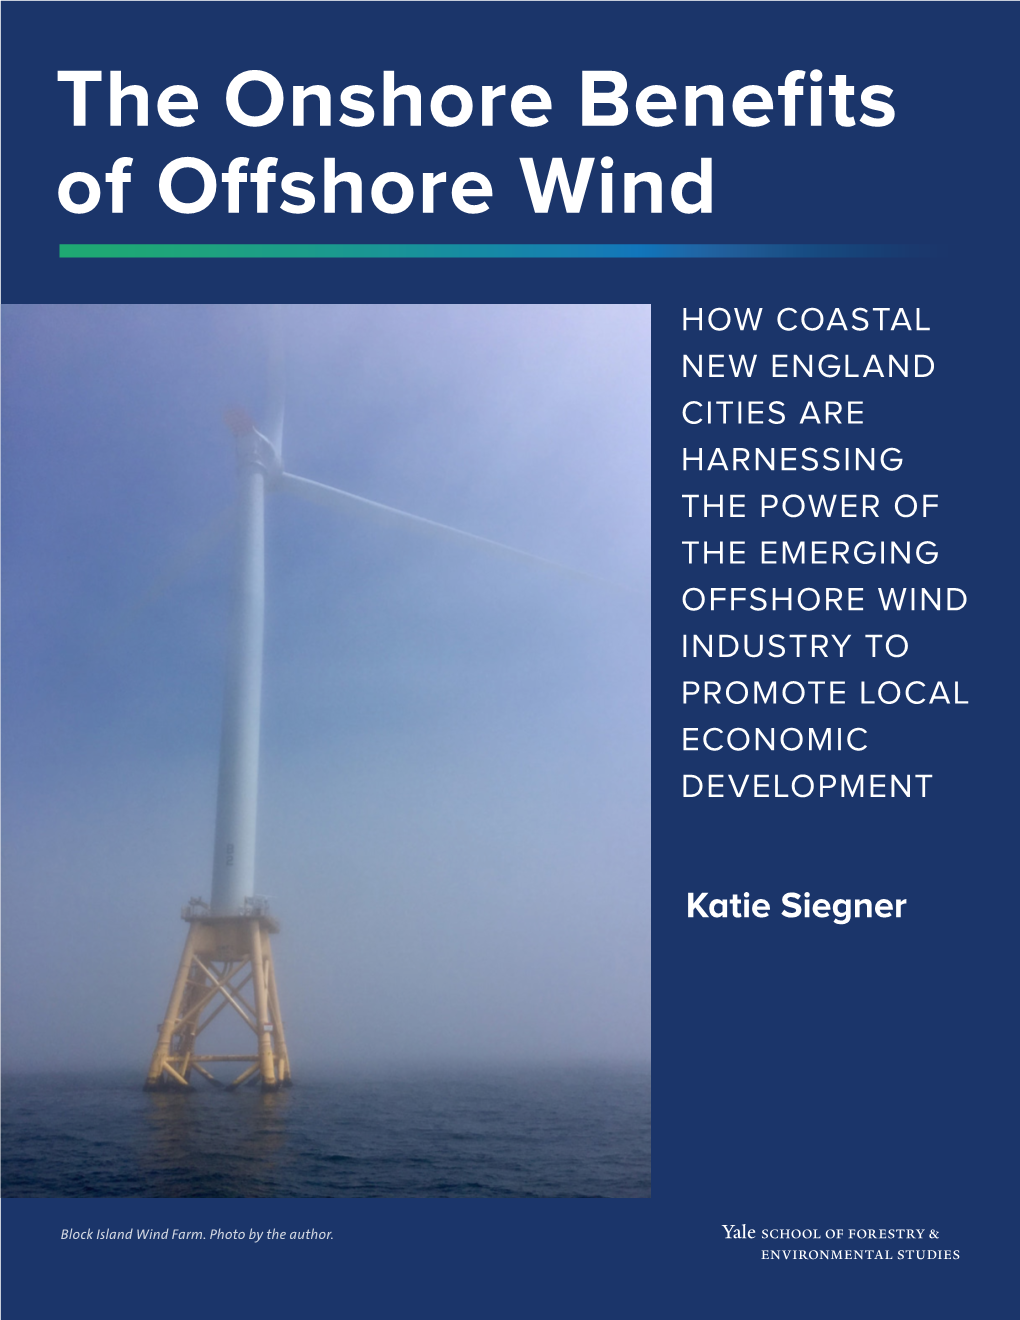 The Onshore Benefits of Offshore Wind